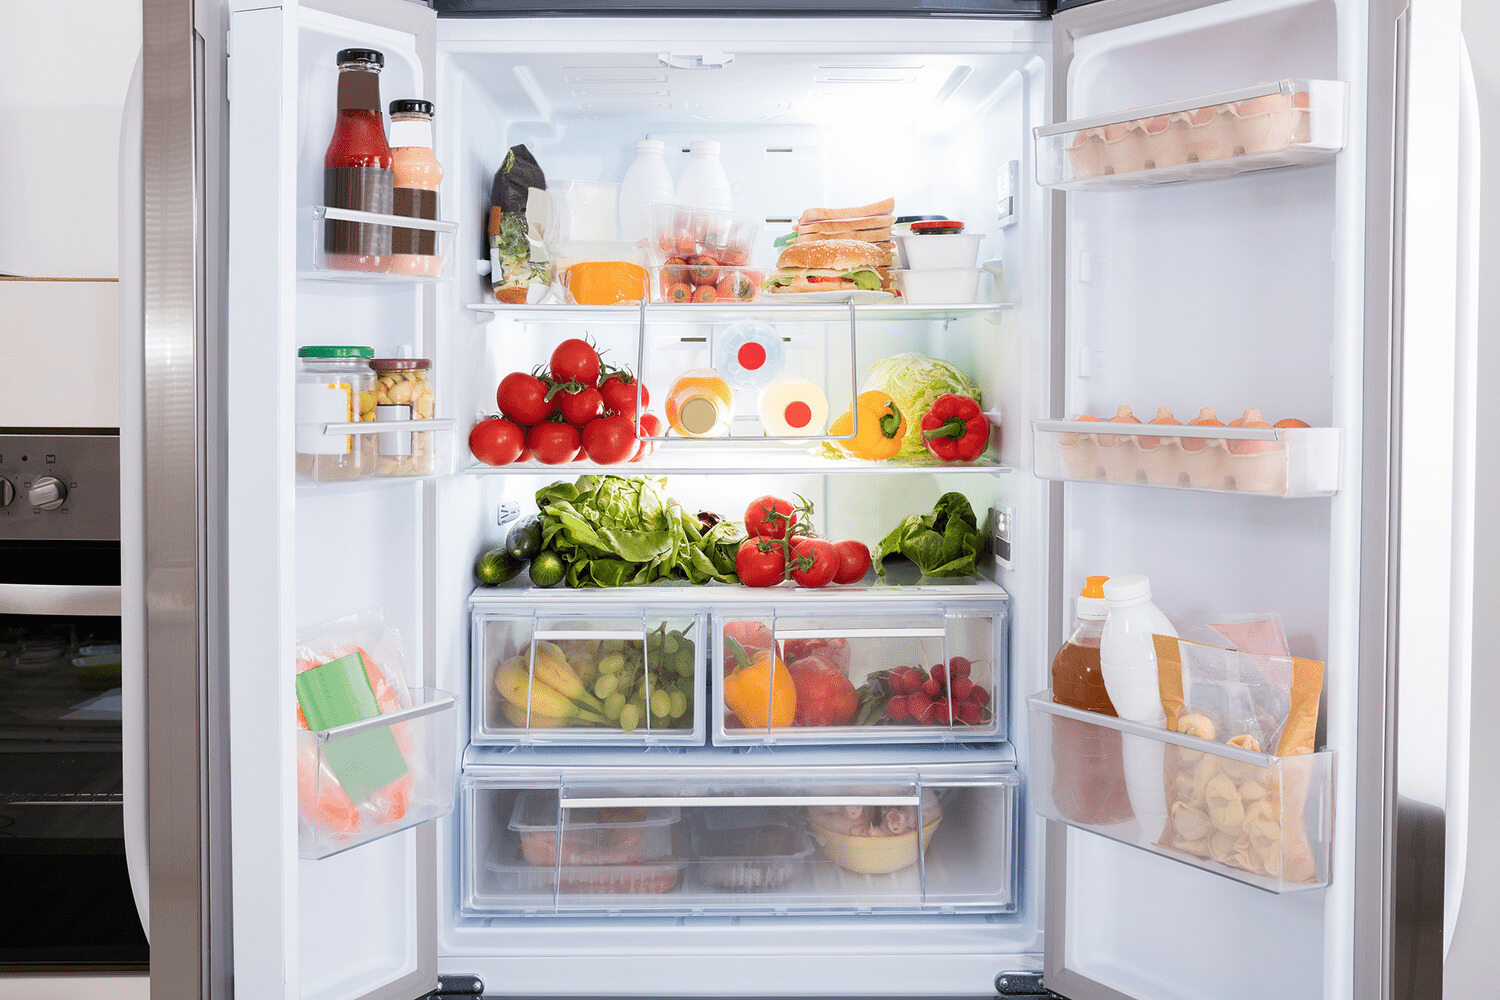 How To Store Food In Fridge Top To Bottom